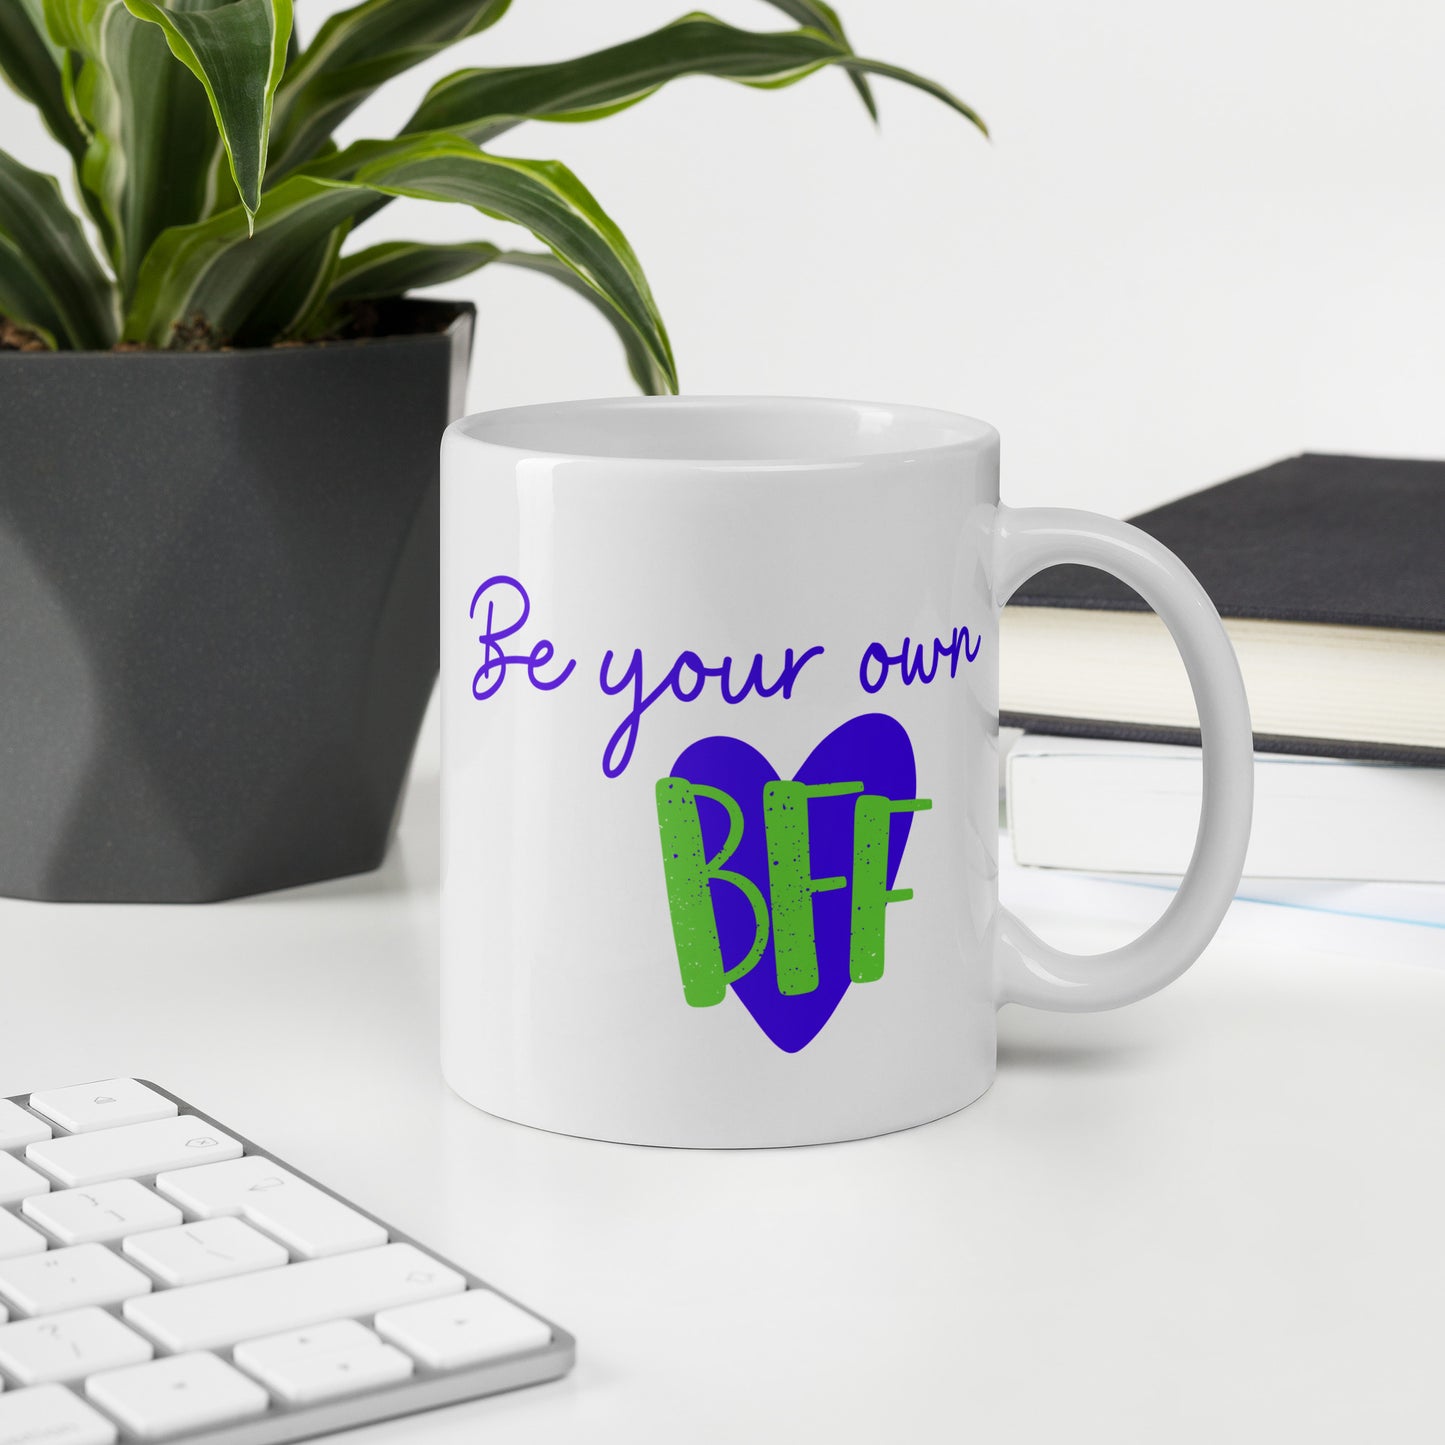 White glossy mug - Be your own BFF